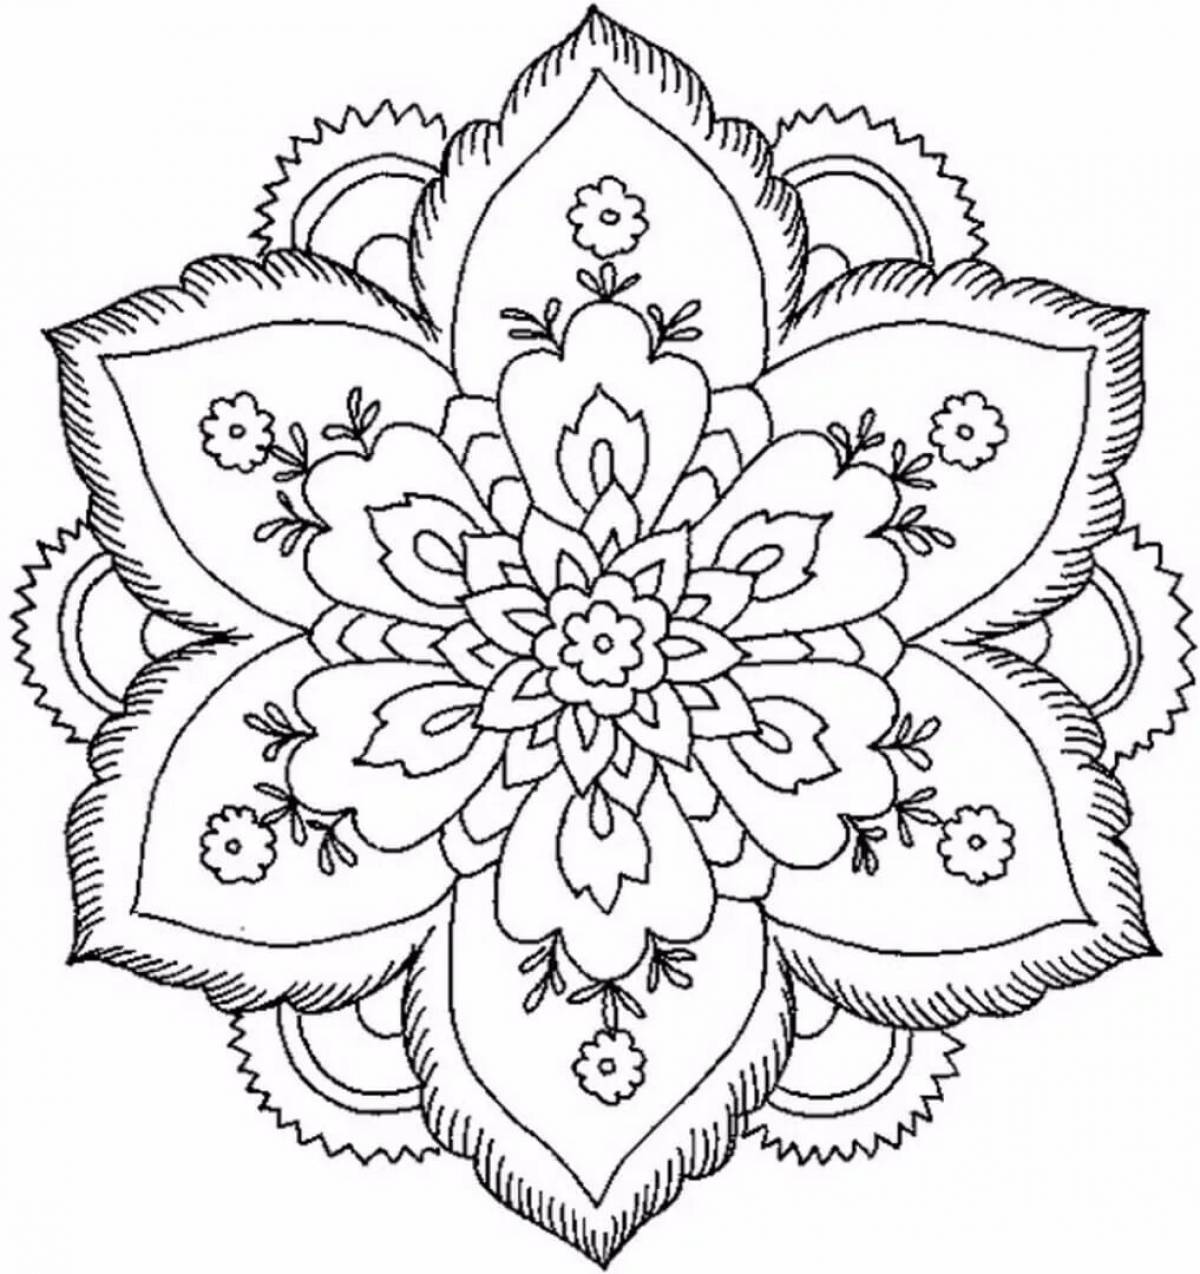 Bright geometric patterns for coloring pages